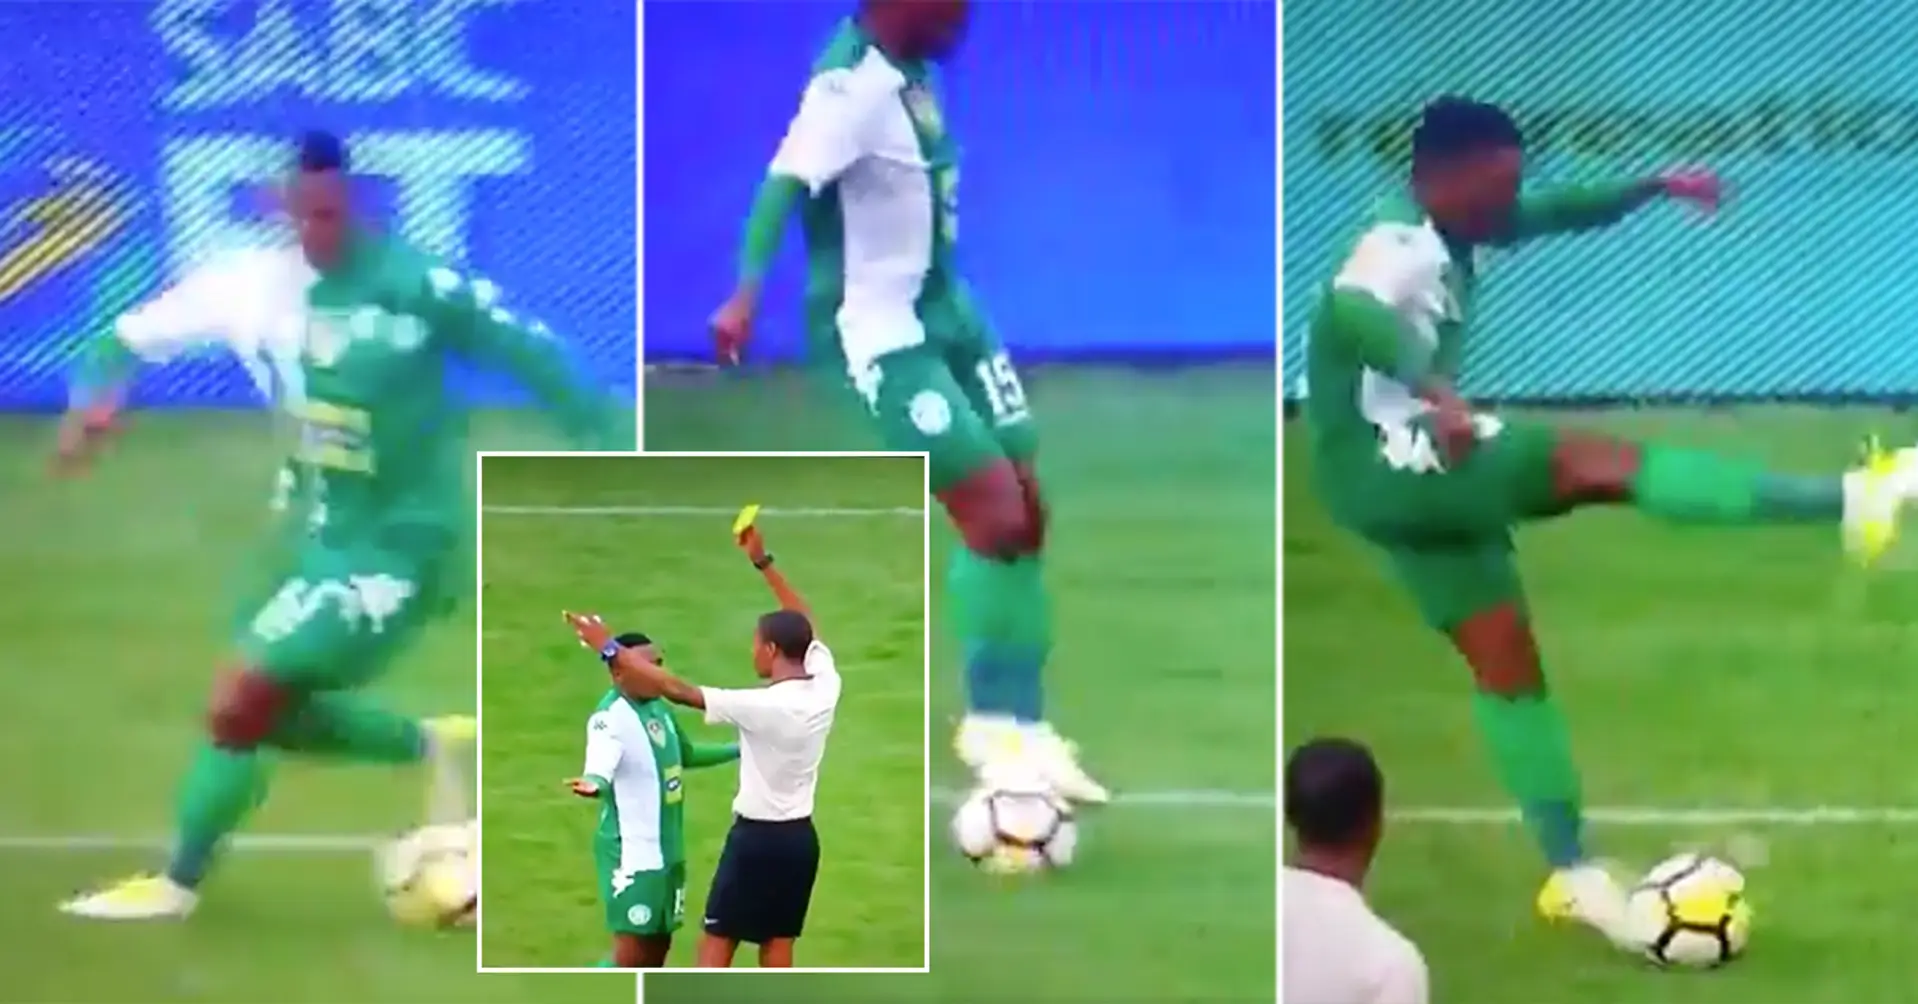 South African player disrespects opponents with four tricks in a row, screams at referee after being booked